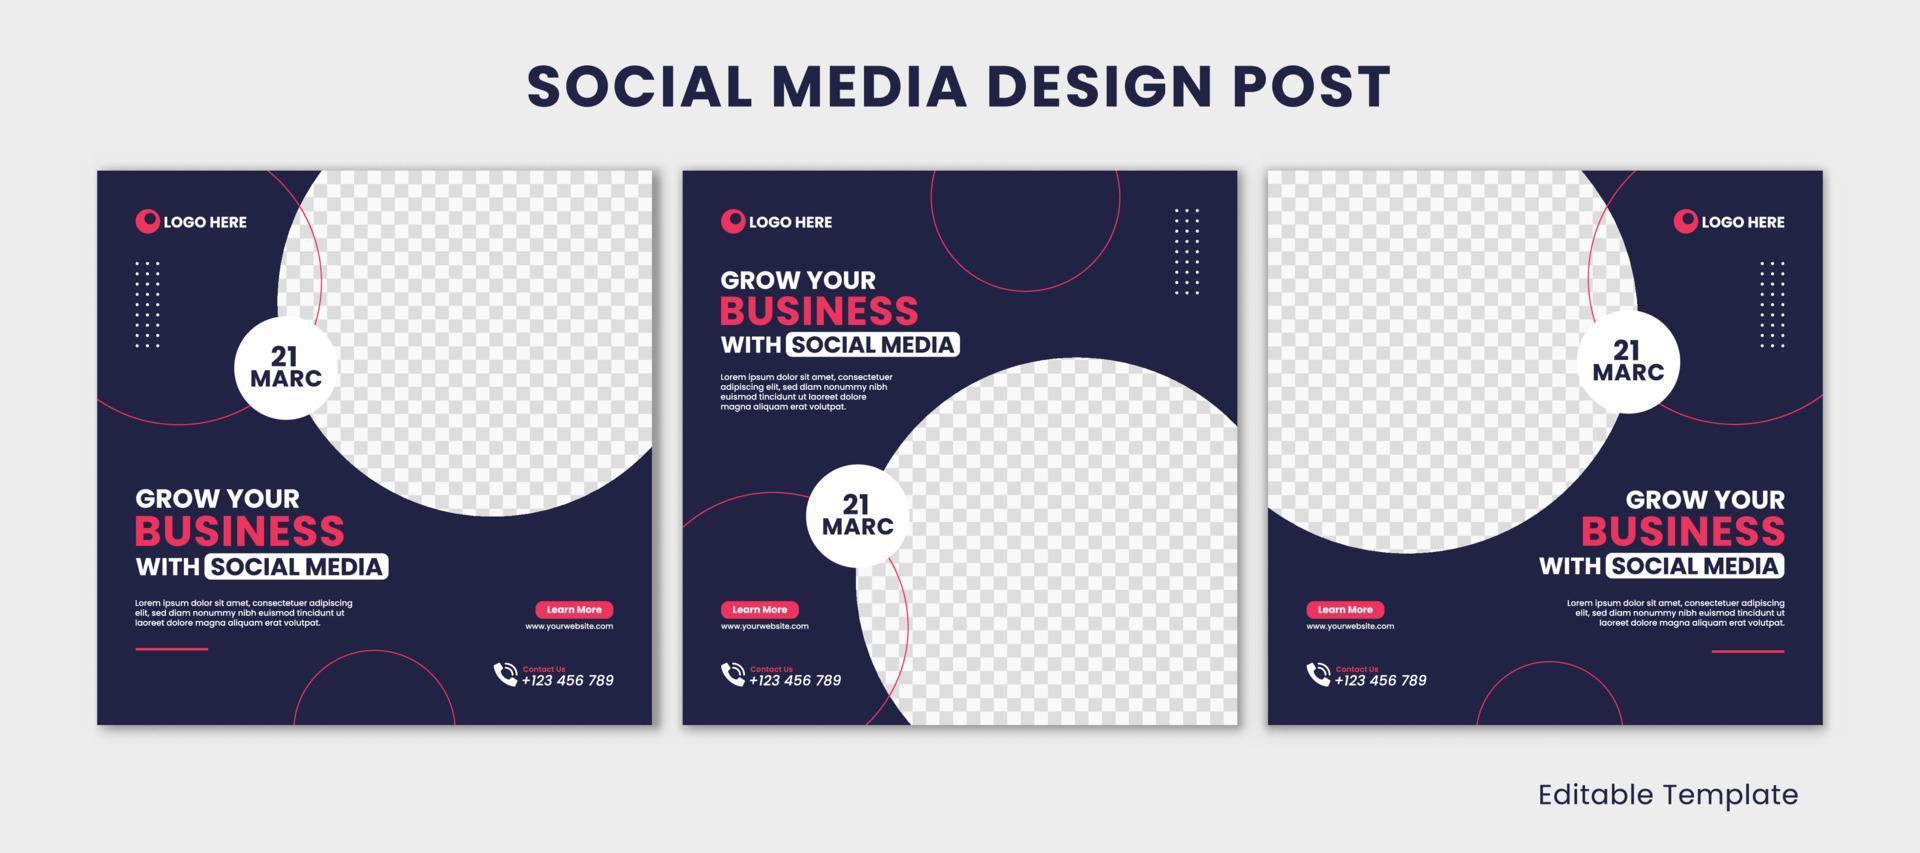 Set of Editable Social Media Post Design Template with Rounded shape and Navy pink color theme. Suitable for Poster, Sale Banner, Ads, Advertisement, Promotion, Business, Company, Corporate vector